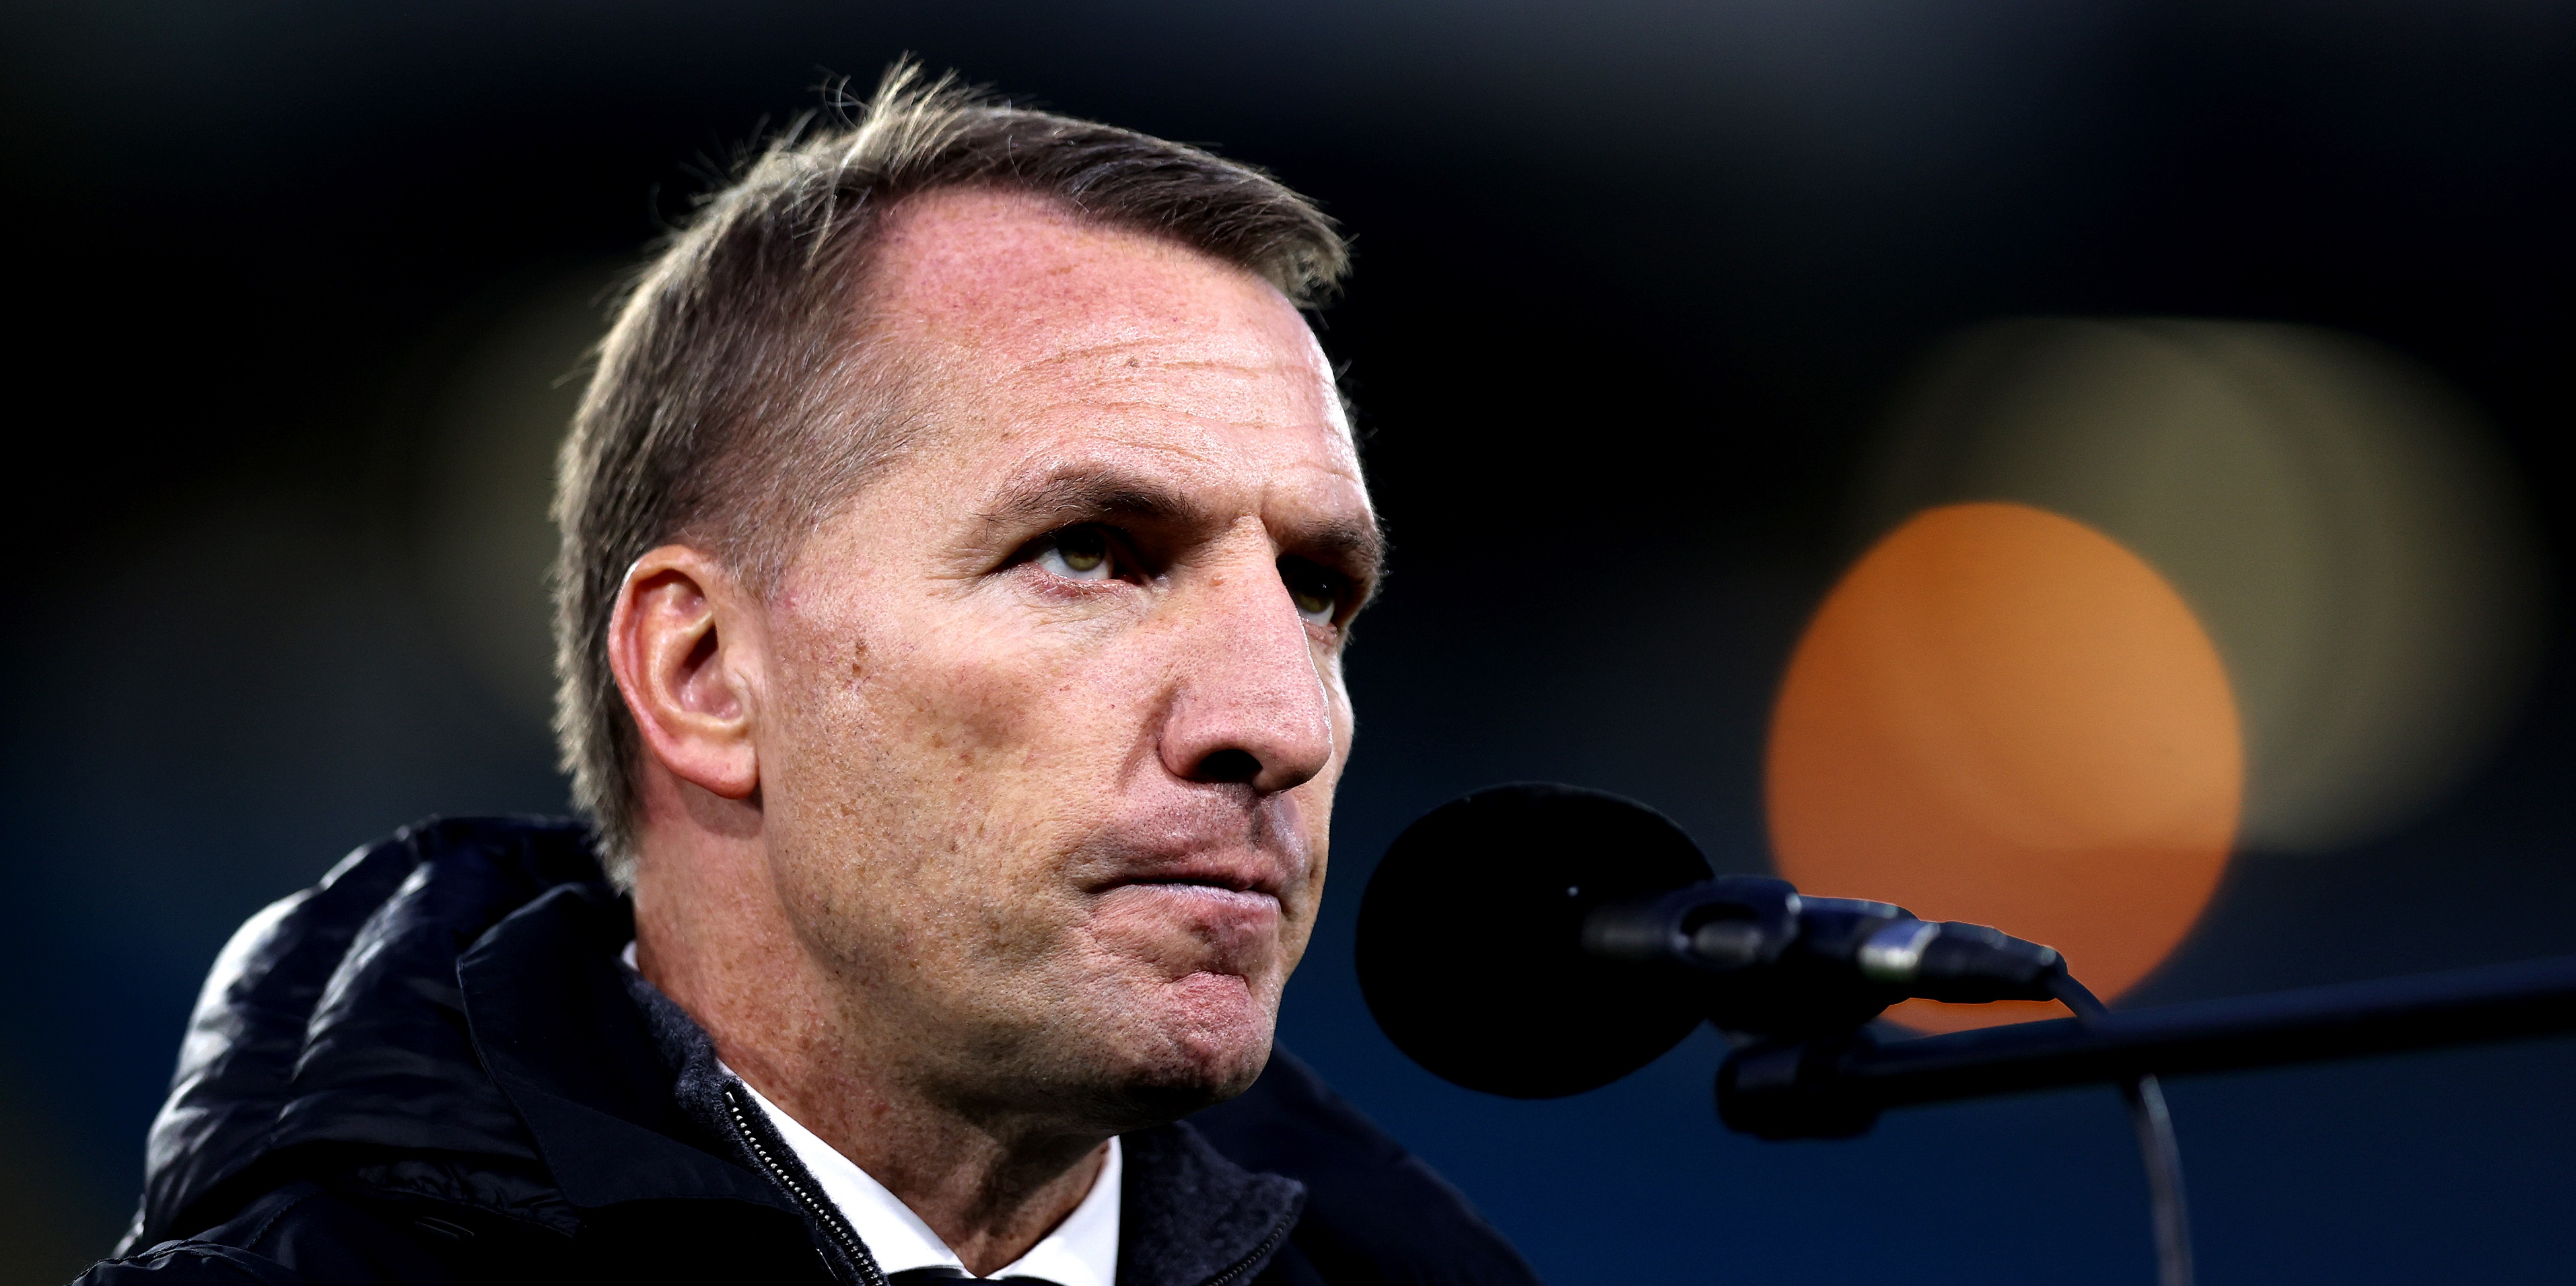 Rodgers won’t turn down United approach if it arrives despite awareness of possible Liverpool backlash, says Graeme Bailey